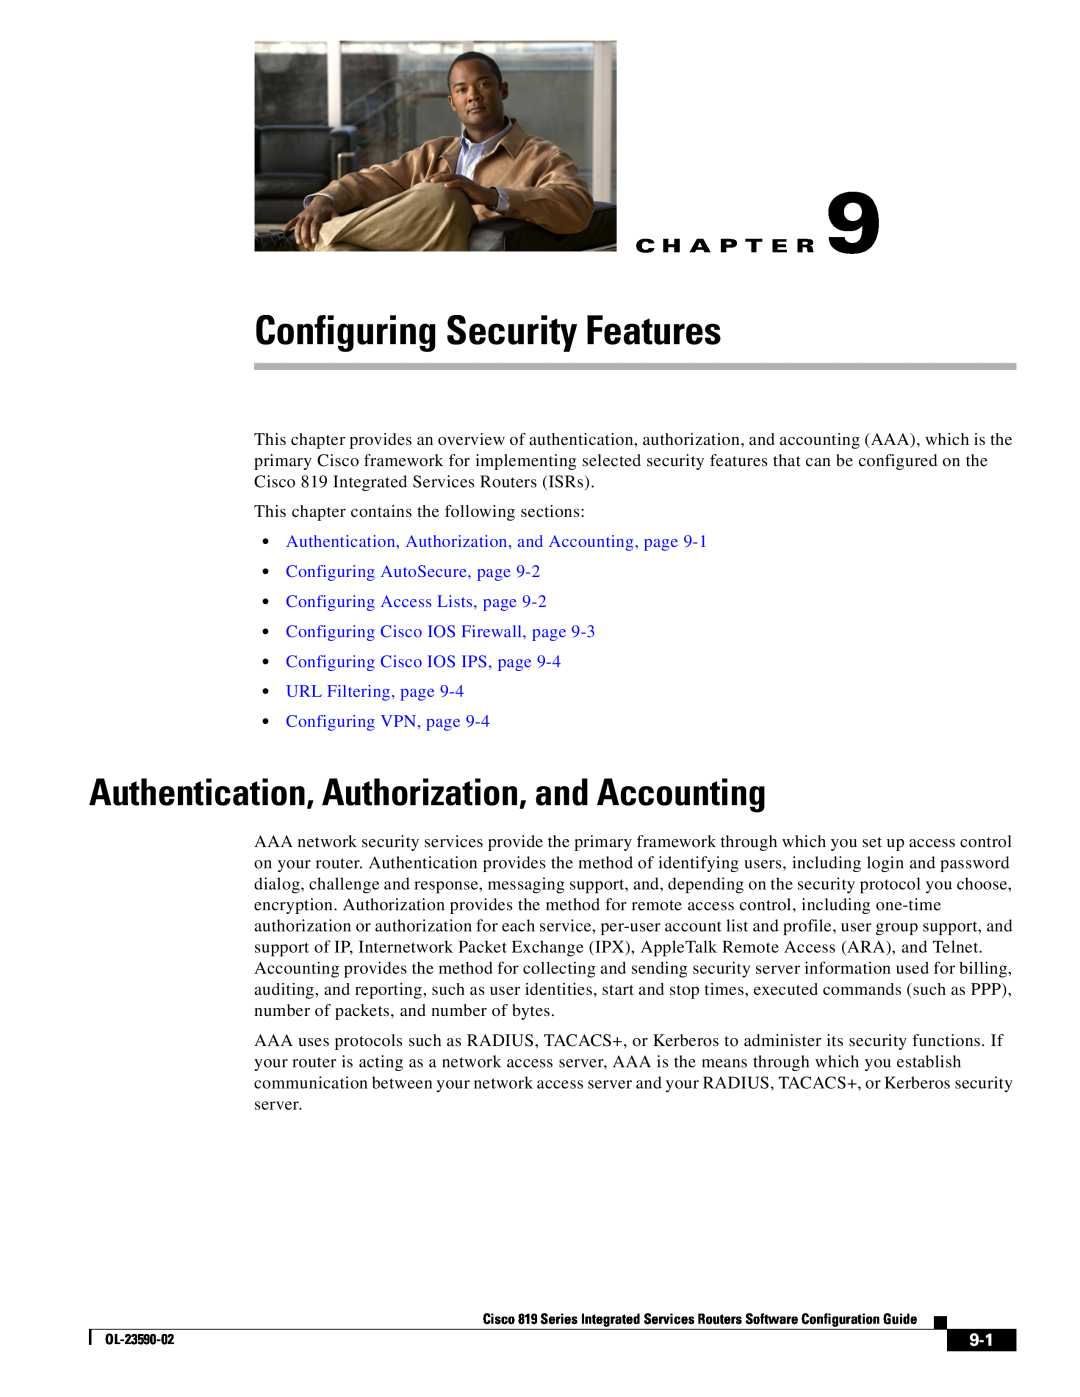 Cisco Systems C819HG4GVK9 Configuring Security Features, Authentication, Authorization, and Accounting, C H A P T E R 